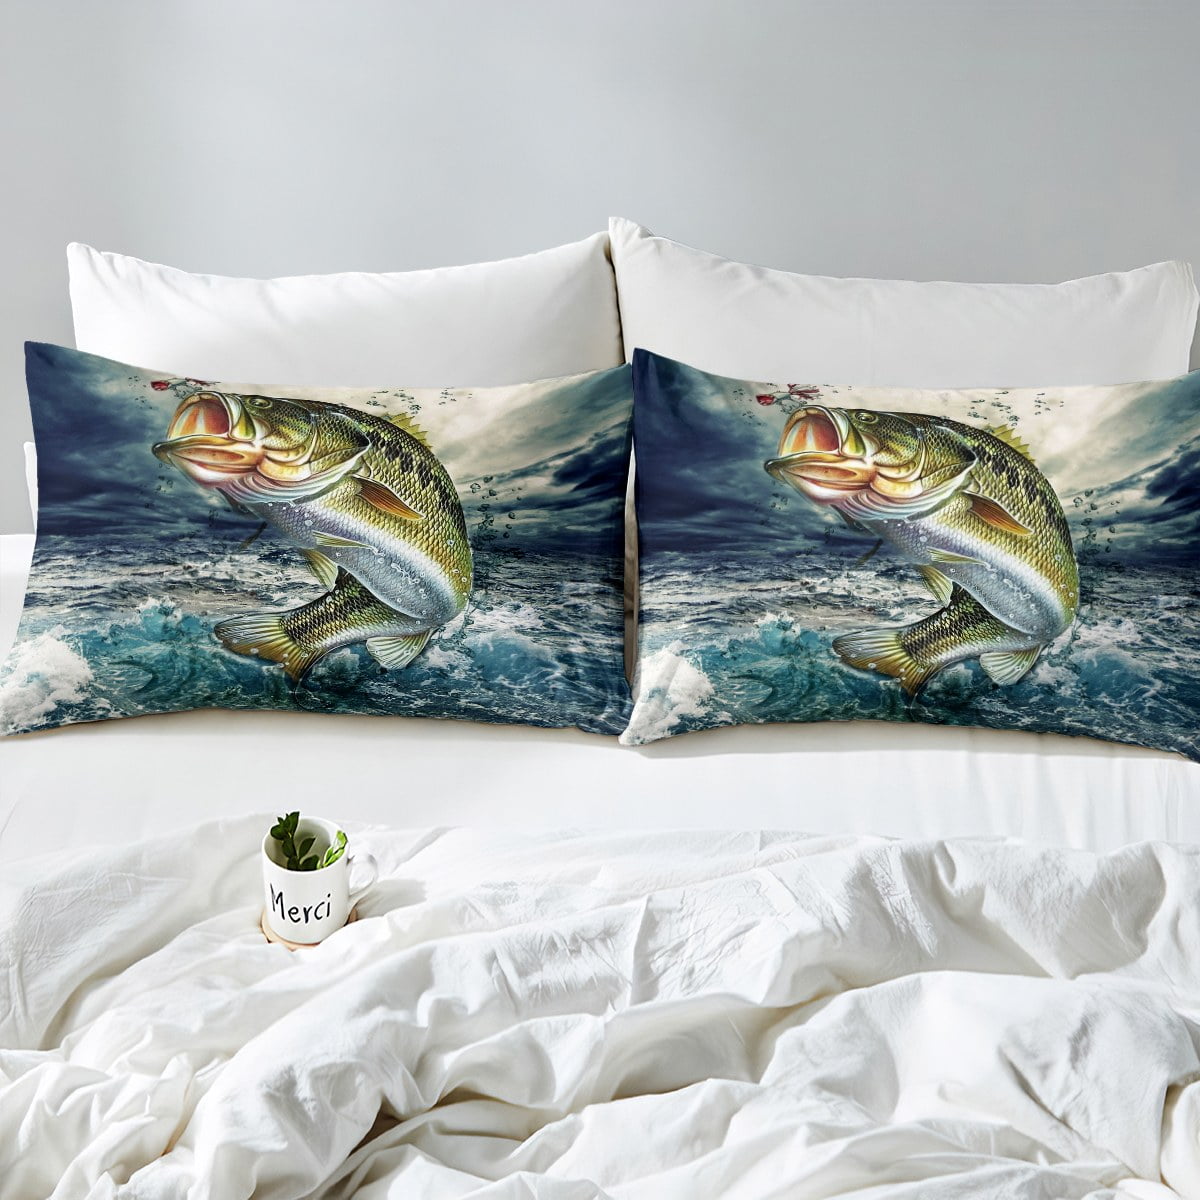 YST Bass Big Fish Comforter Cover Twin Size,Pike Big Fish Bedding Set Eat  Small Fish Duvet Cover For Kids Boys Teen Men Ocean Fishing Bedspread Cover  With Zipper 1 Pillow Case Green Blue 